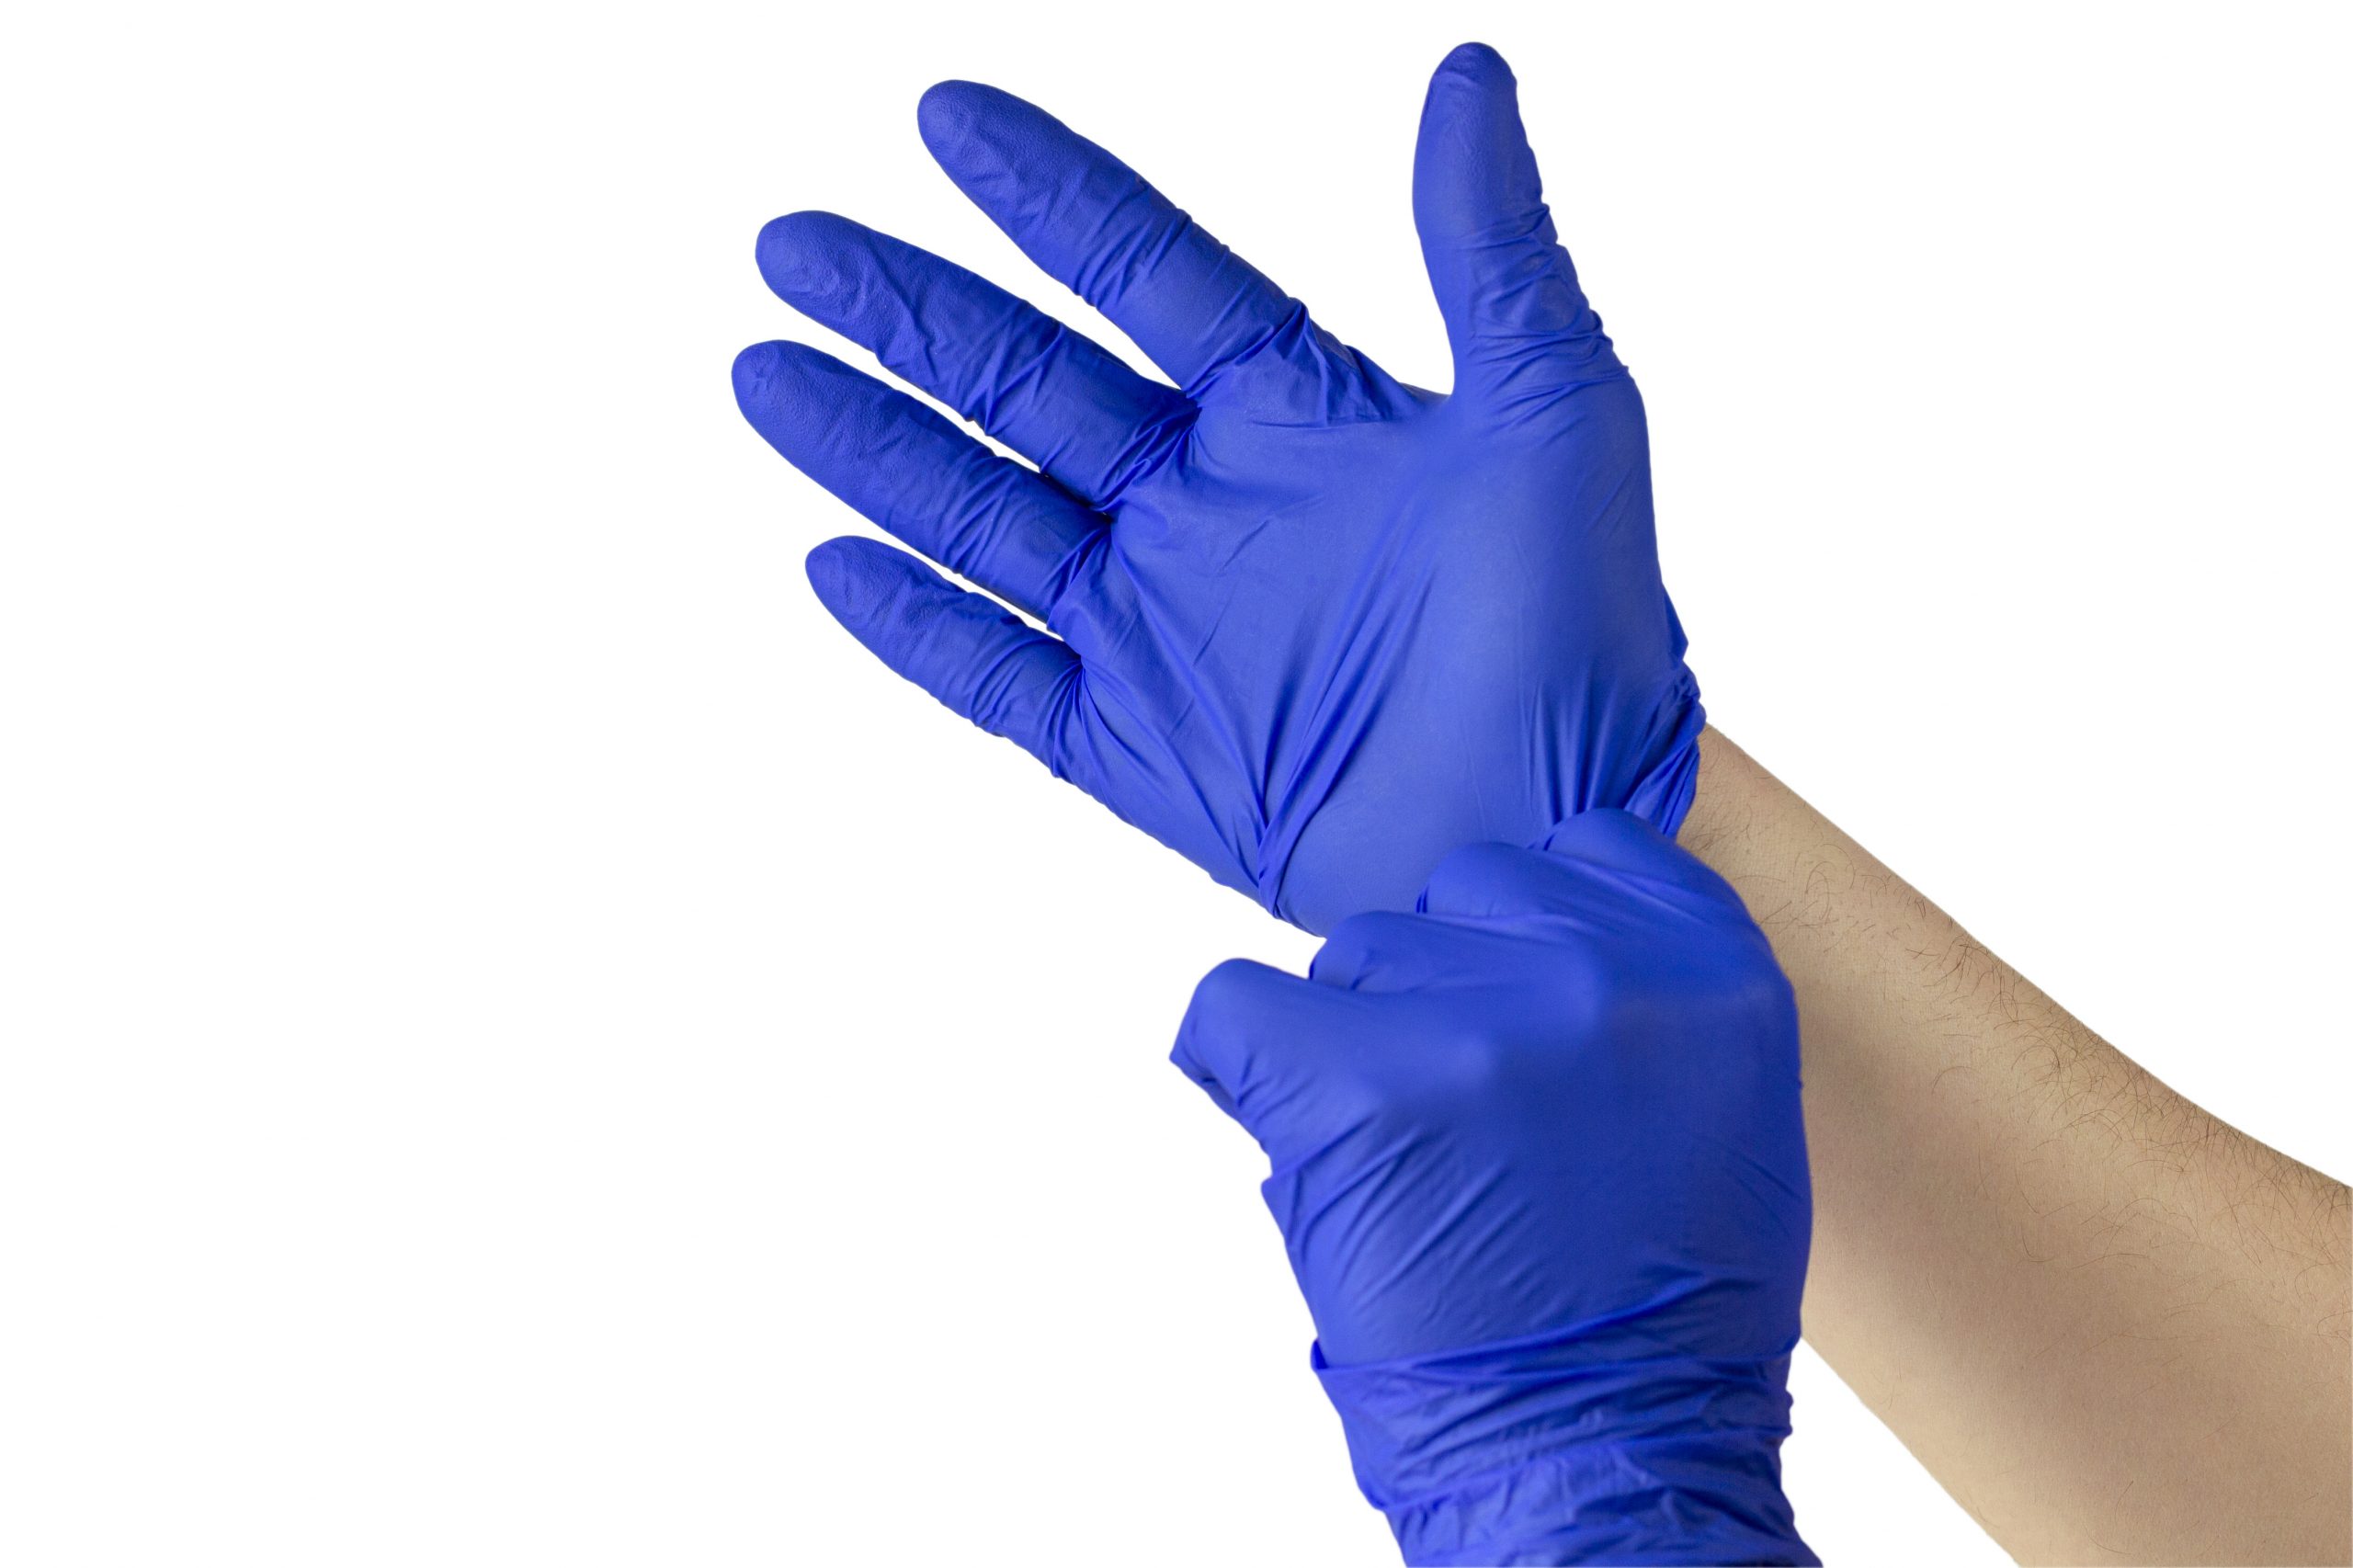 Glove 101: Types of Safety Gloves - EHS Daily Advisor